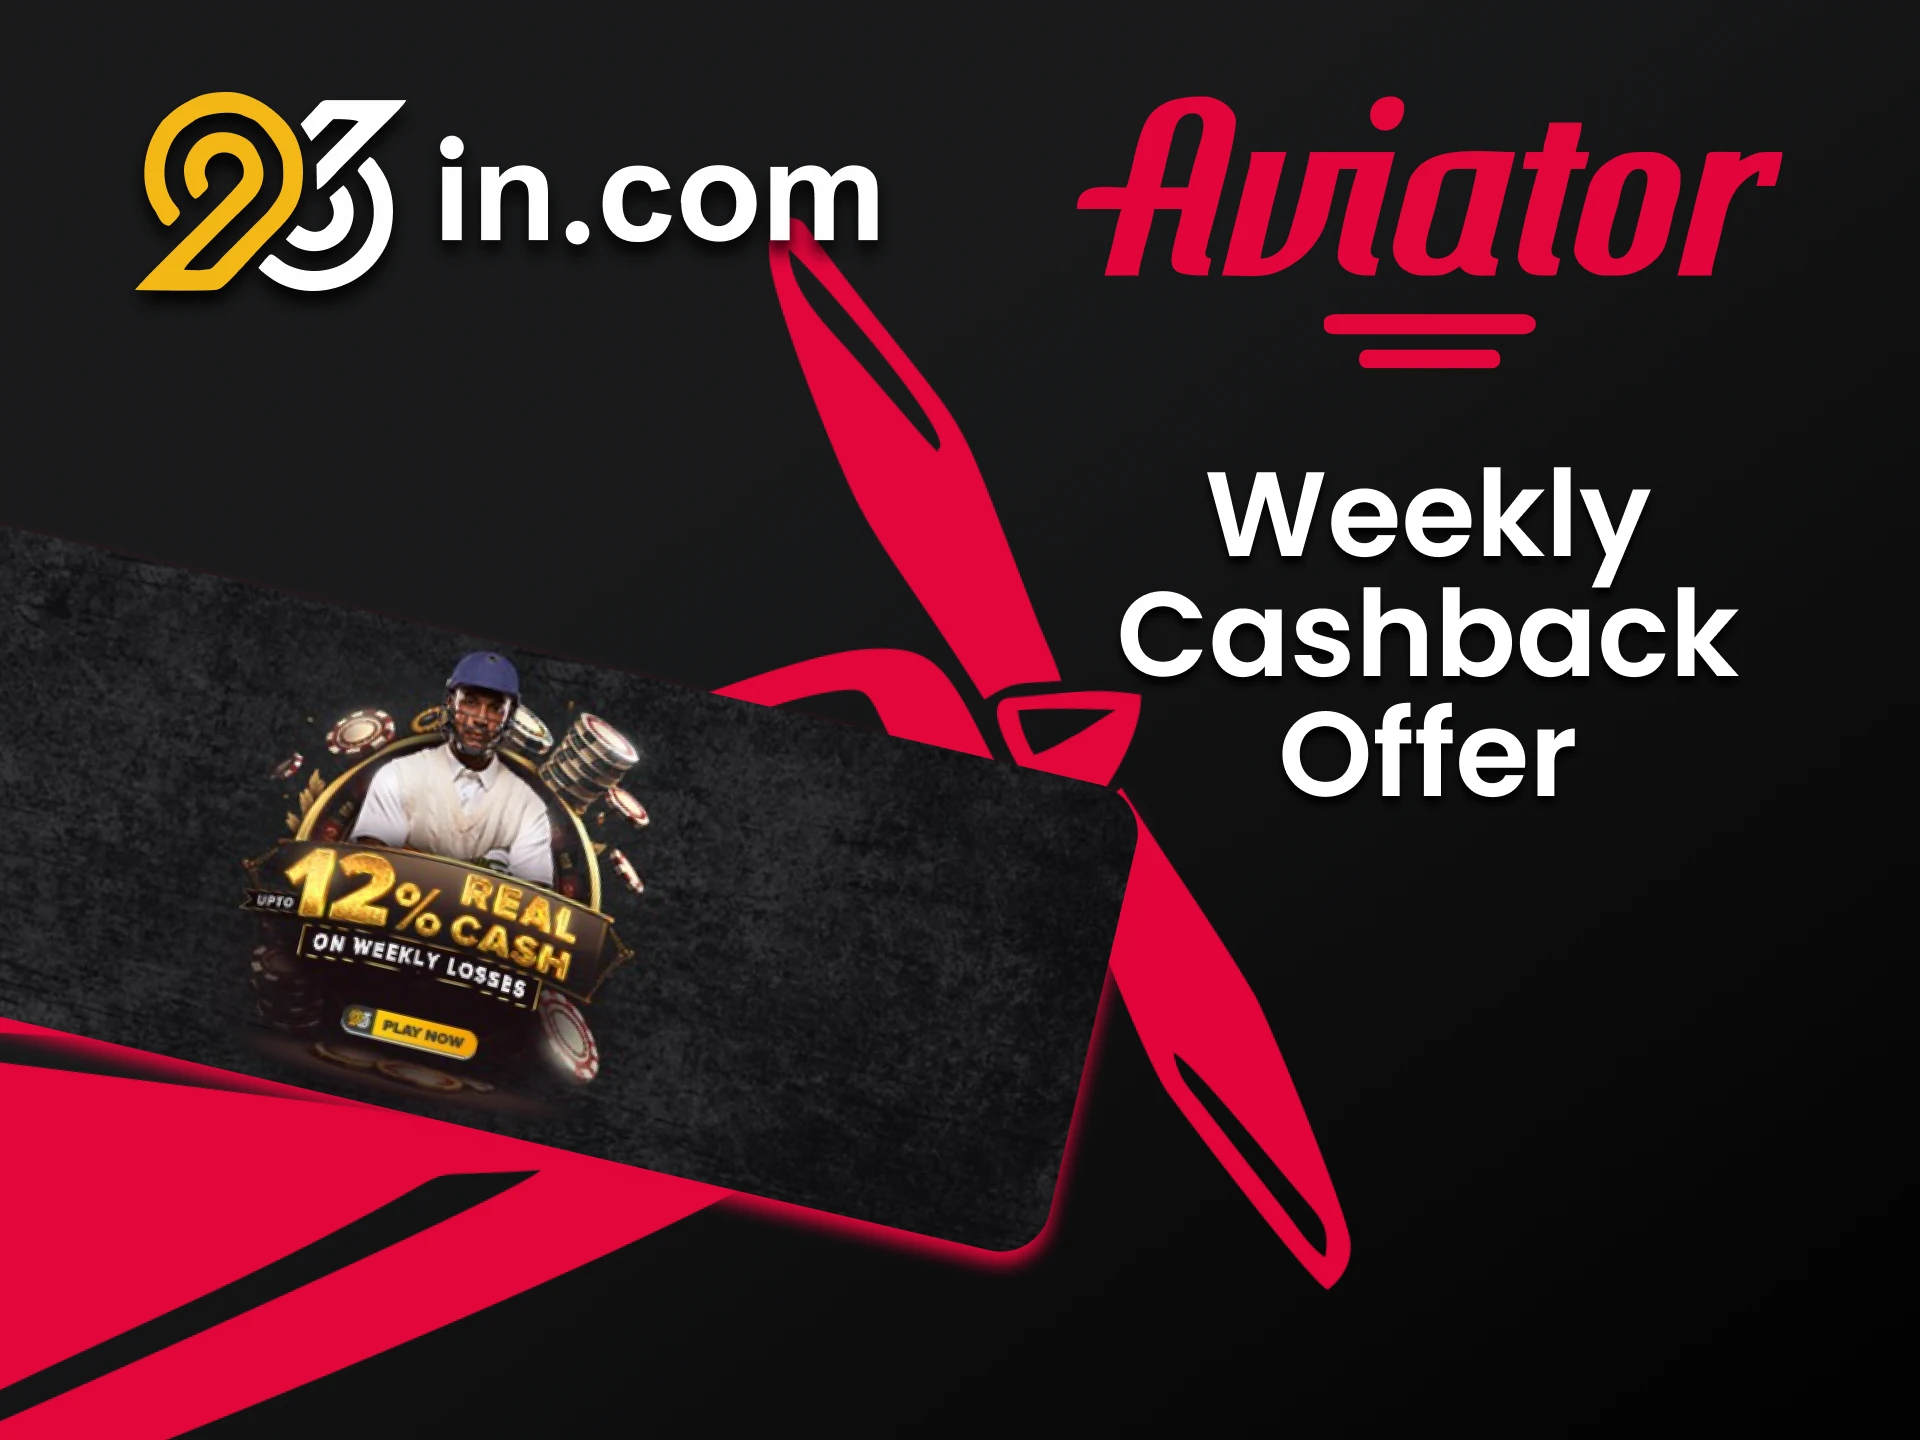 Get weekly Aviator cashback from 96in.